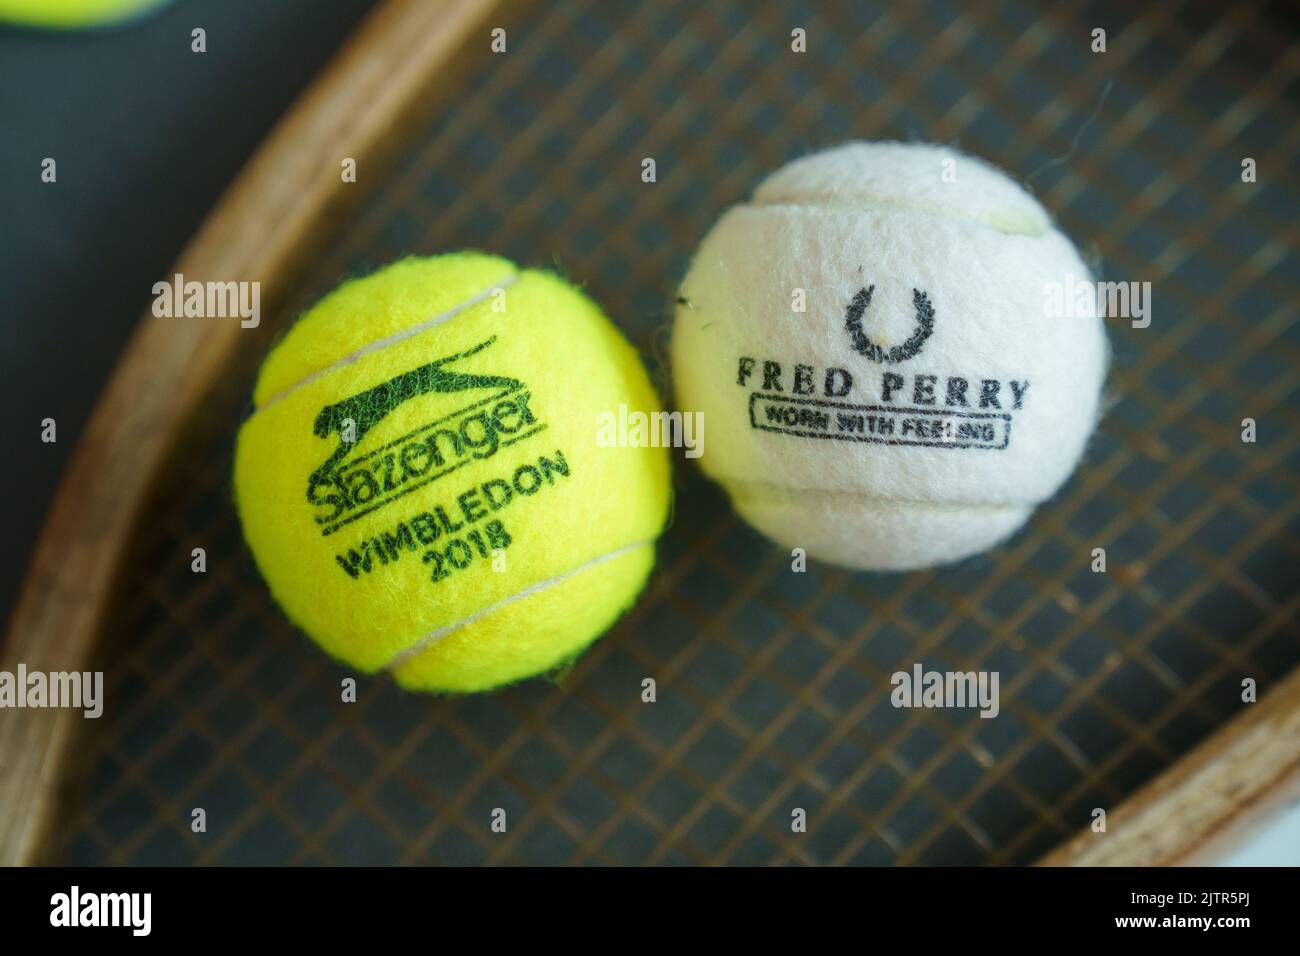 Fred Perry tennis ball and old wooden racket at Wimbledon Championships Stock Photo